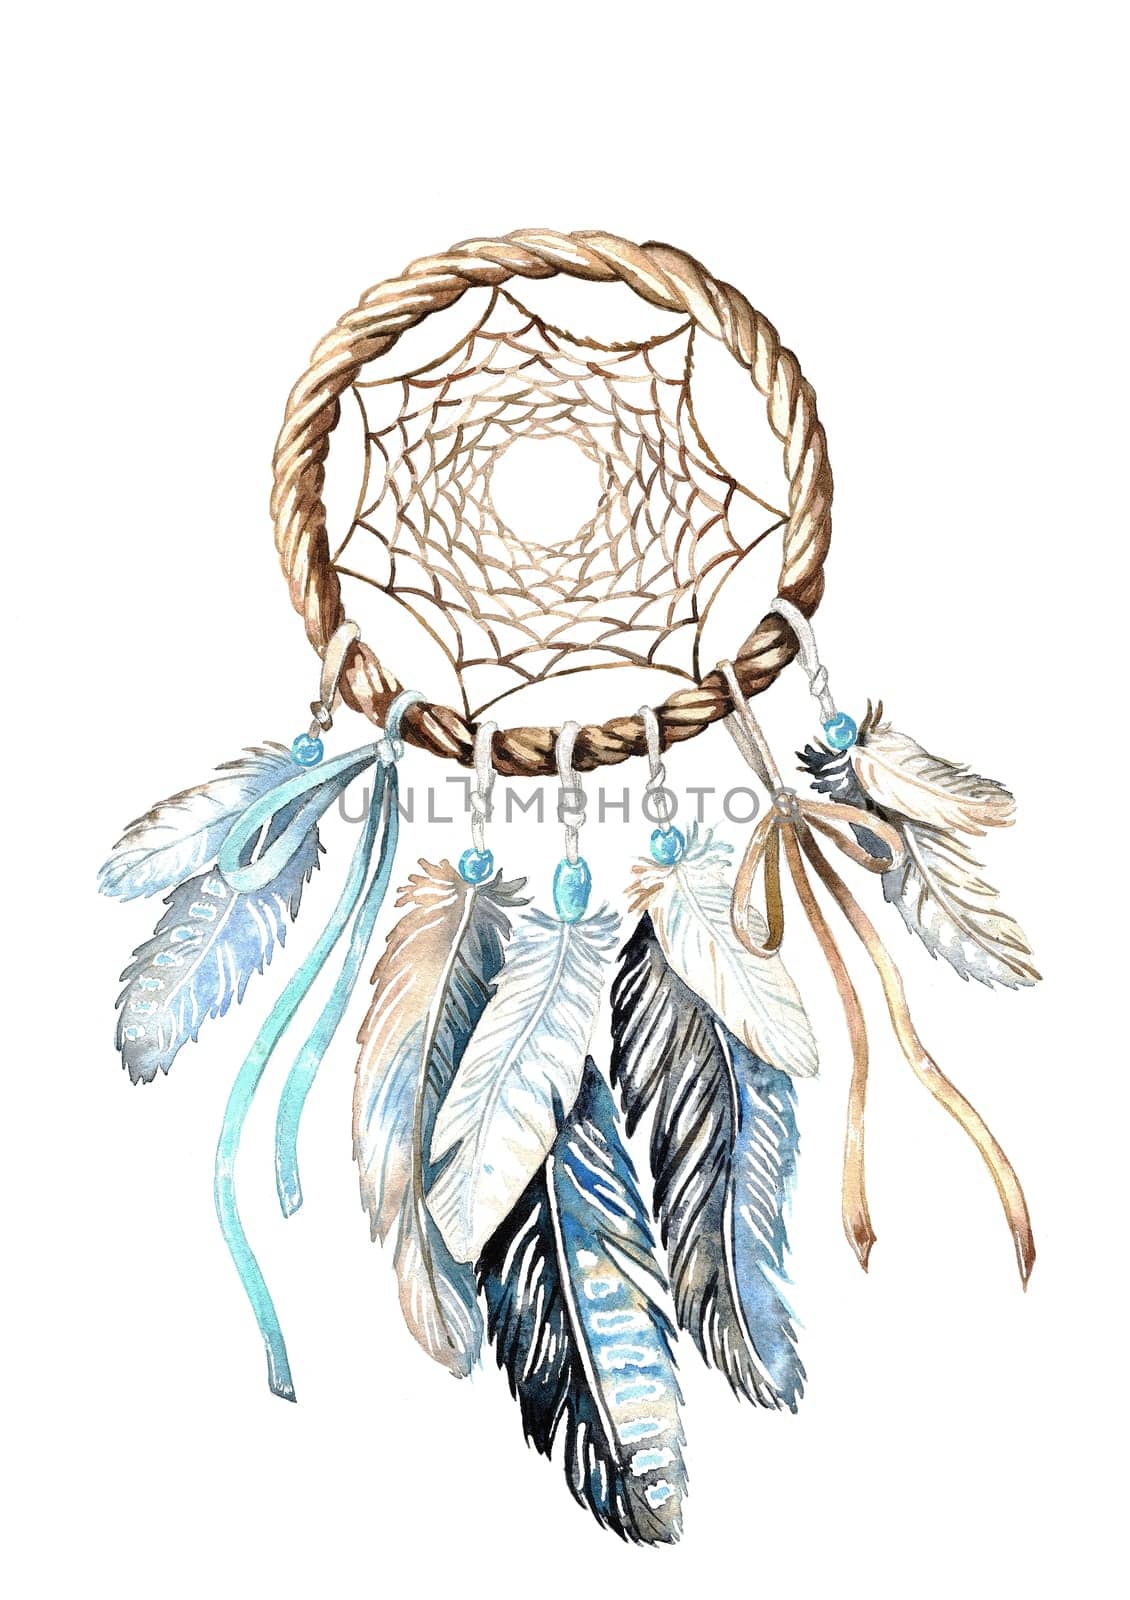 Beautiful fashion boho illustration with dreamcatcher feathers and beads by fireFLYart